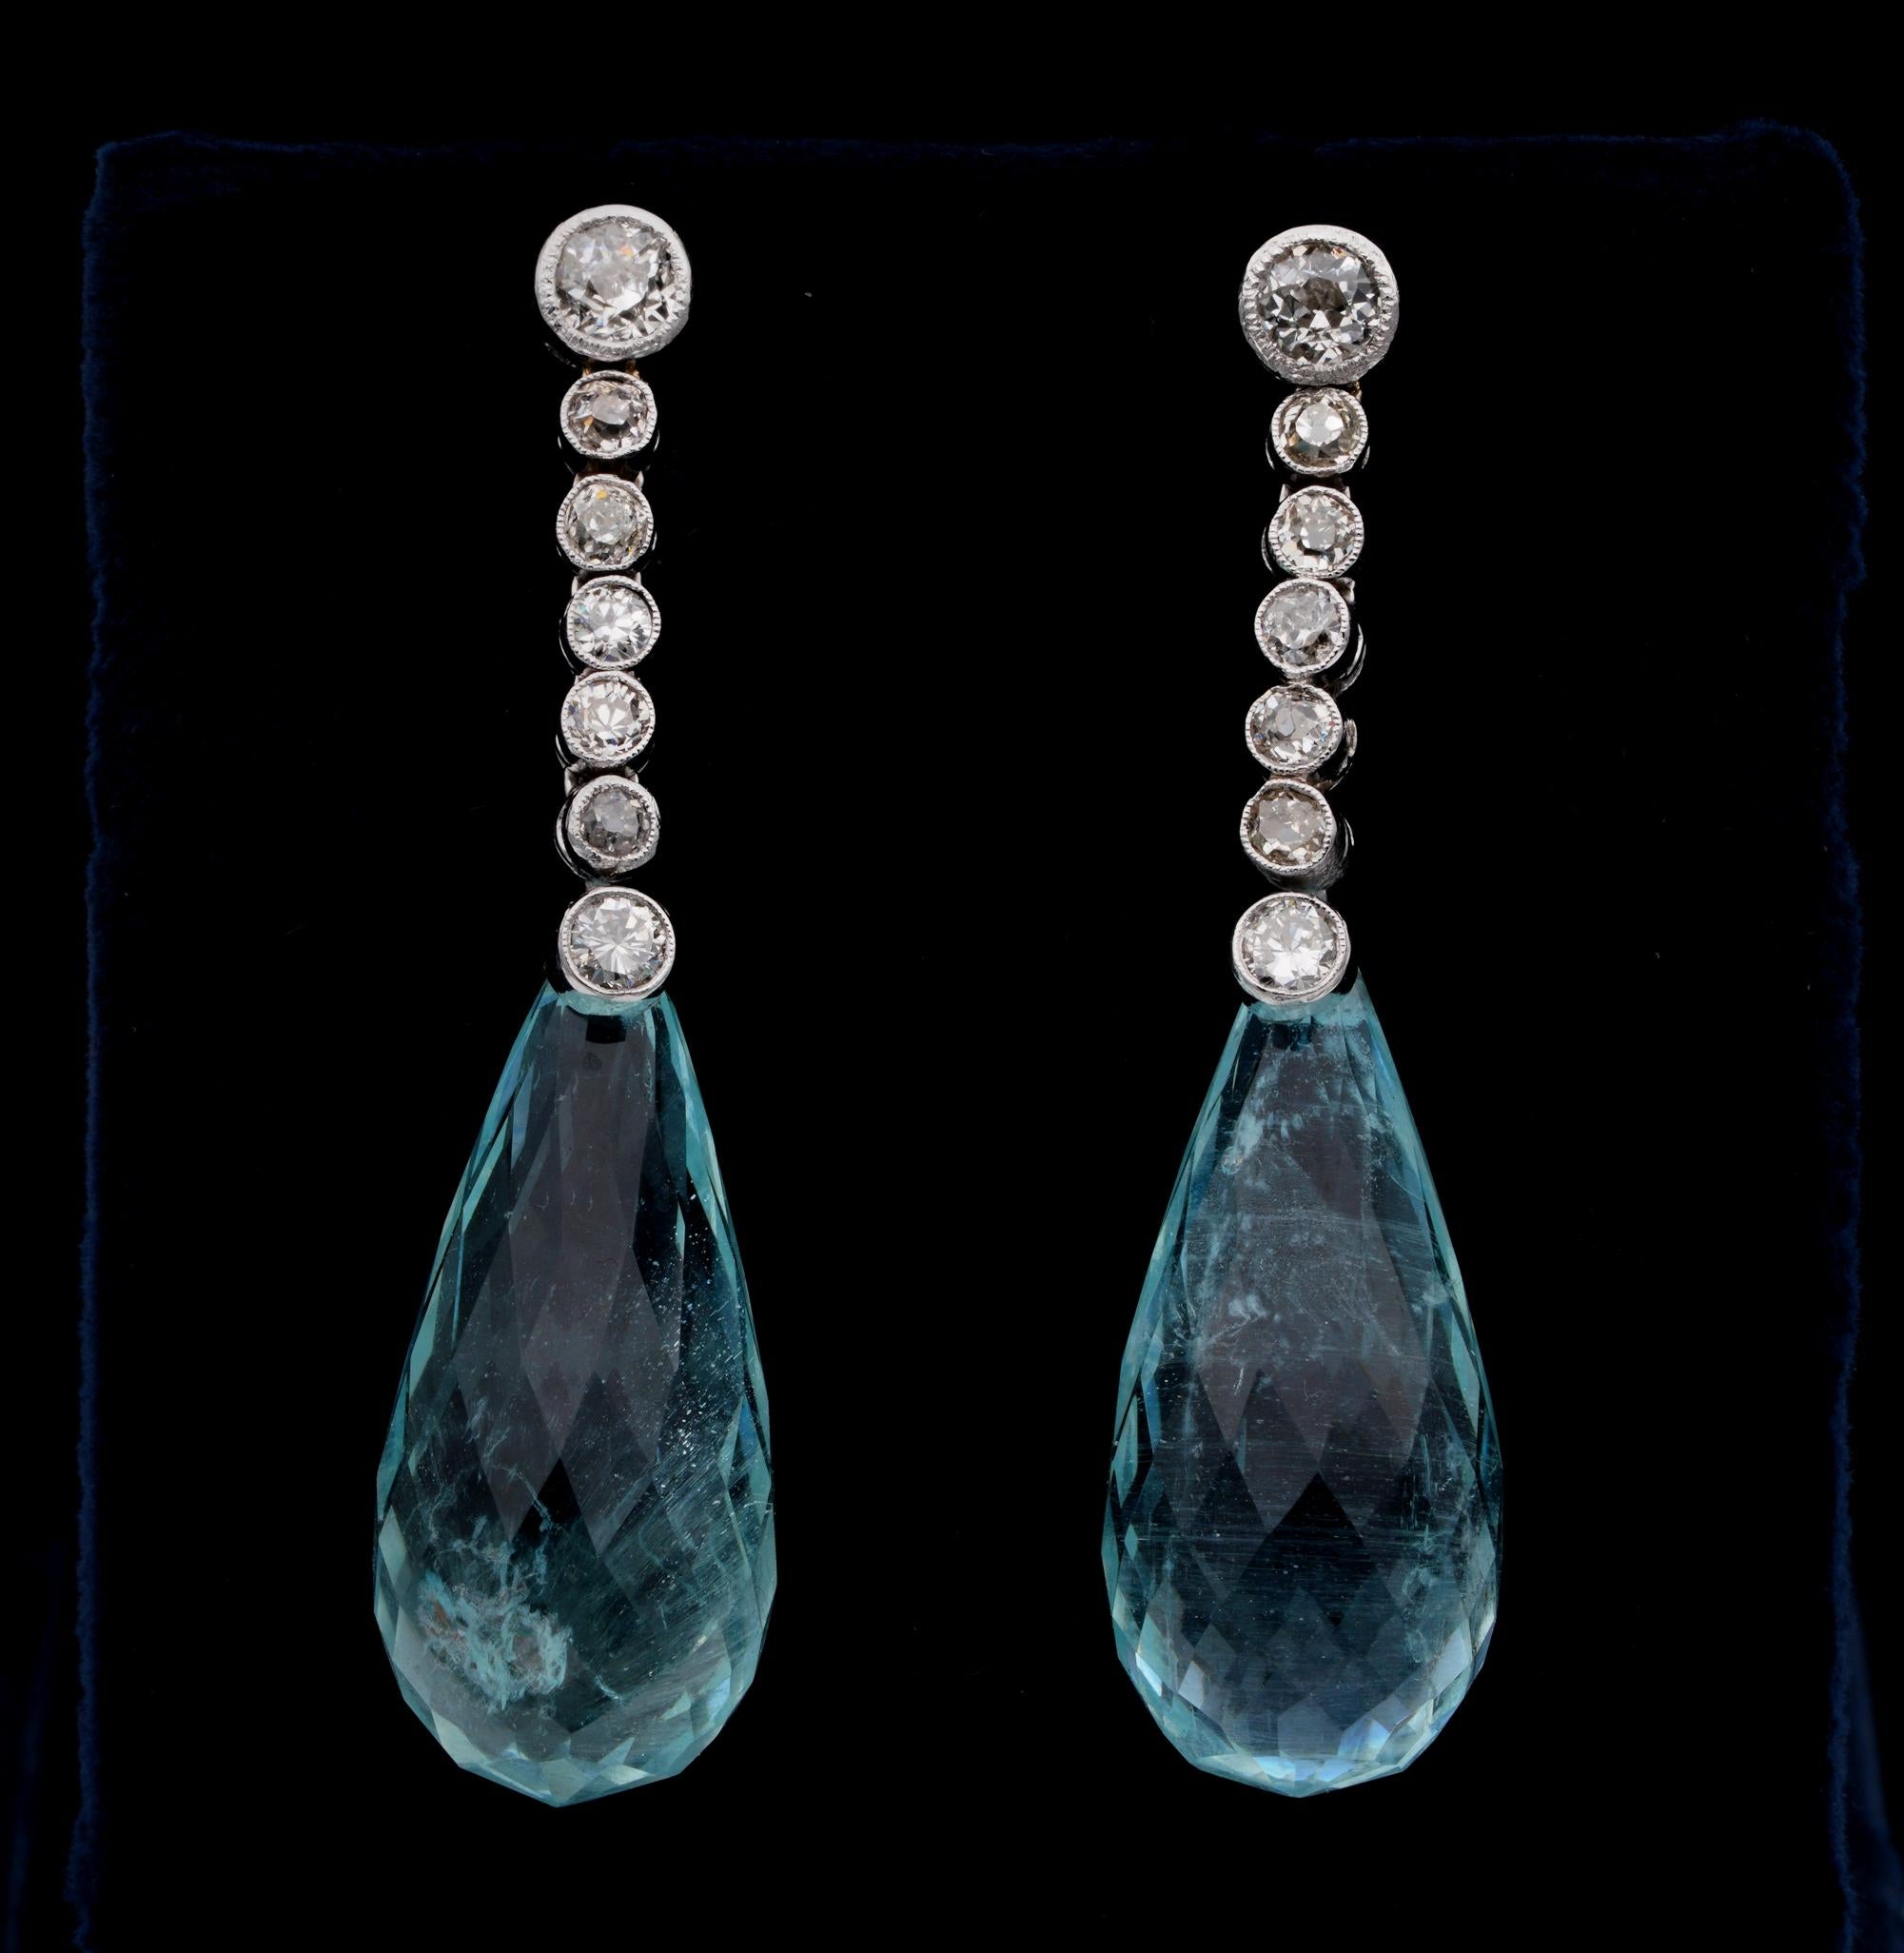 The Rarity Corner

Enchanting Edwardian period, 1910 ca – French marks Aquamarine and Diamond drop earrings
The good ones for a life time
Long swinging drop hand crafted from solid Platinum except the posts made of 18KT gold
Sleek line of antique